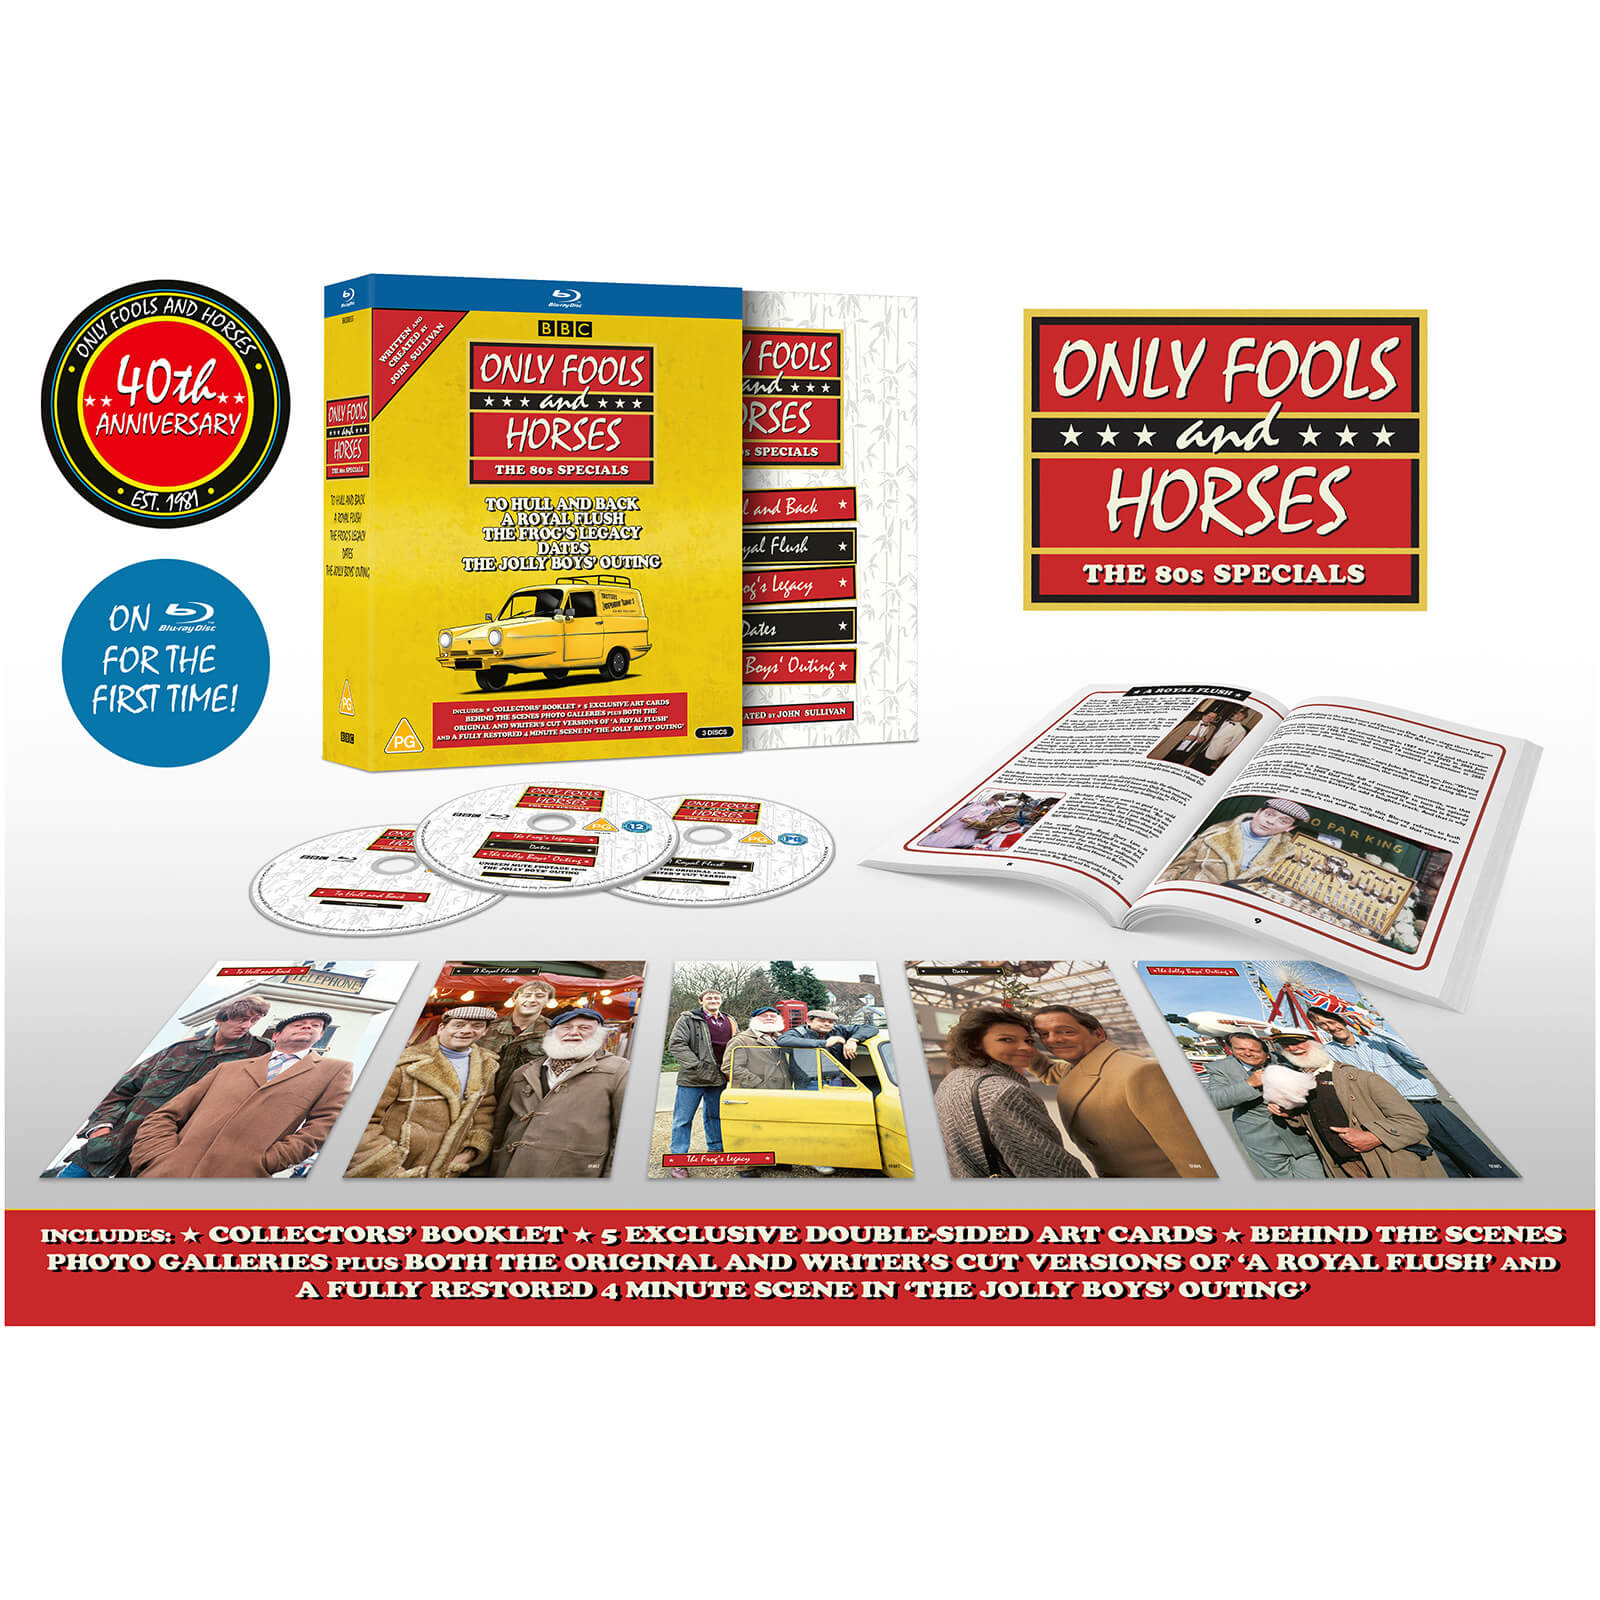 Only Fools and Horses - The 80s Specials (Tradewide) von BBC